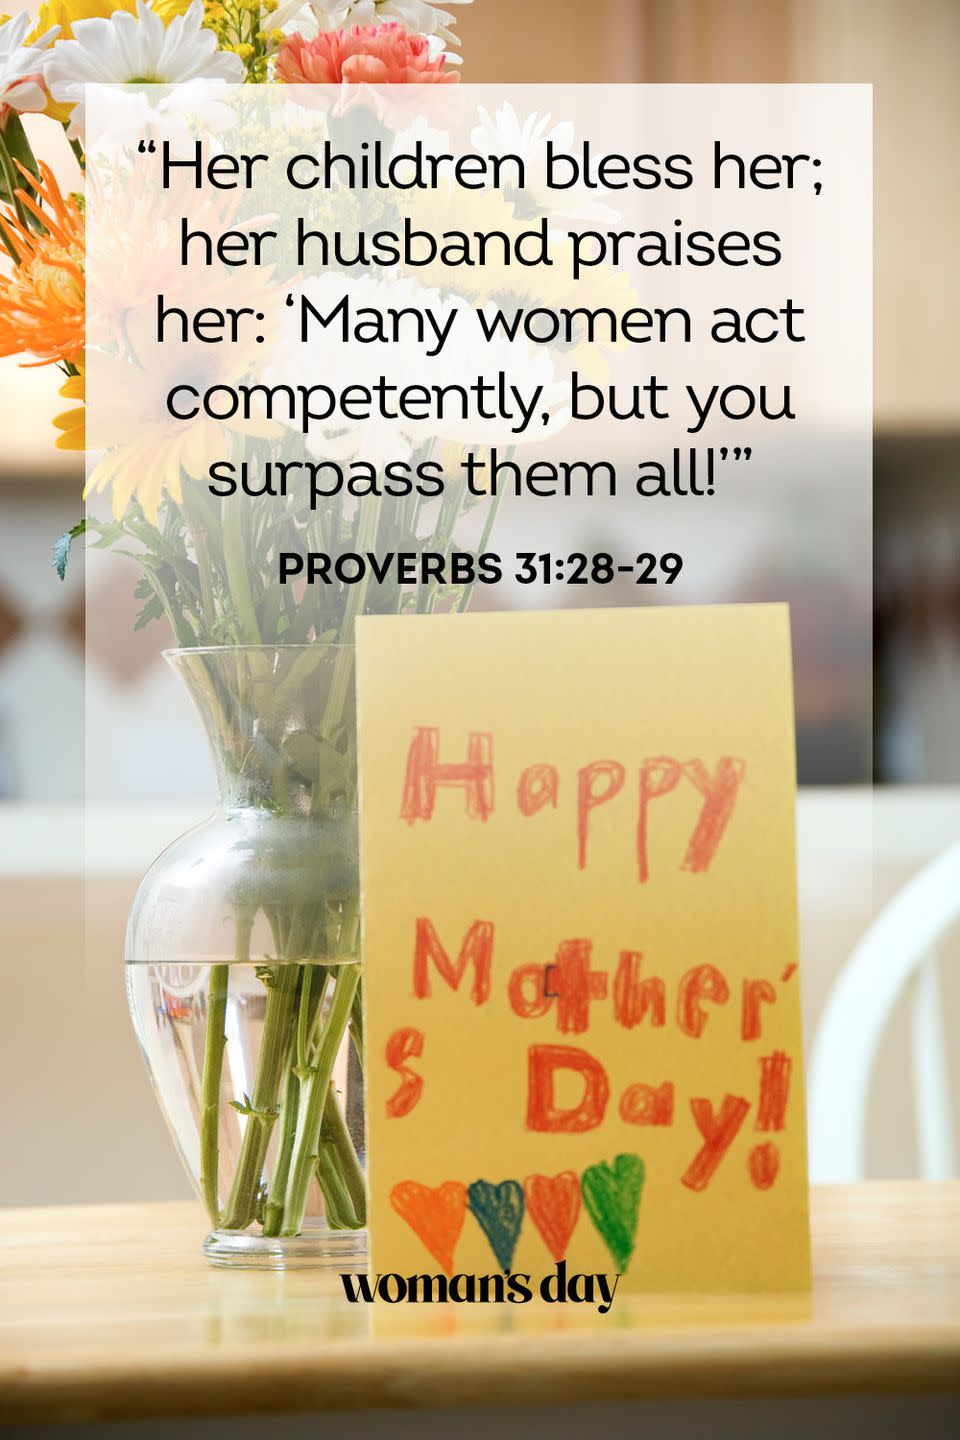 mothers day bible verses proverbs 31 28 29